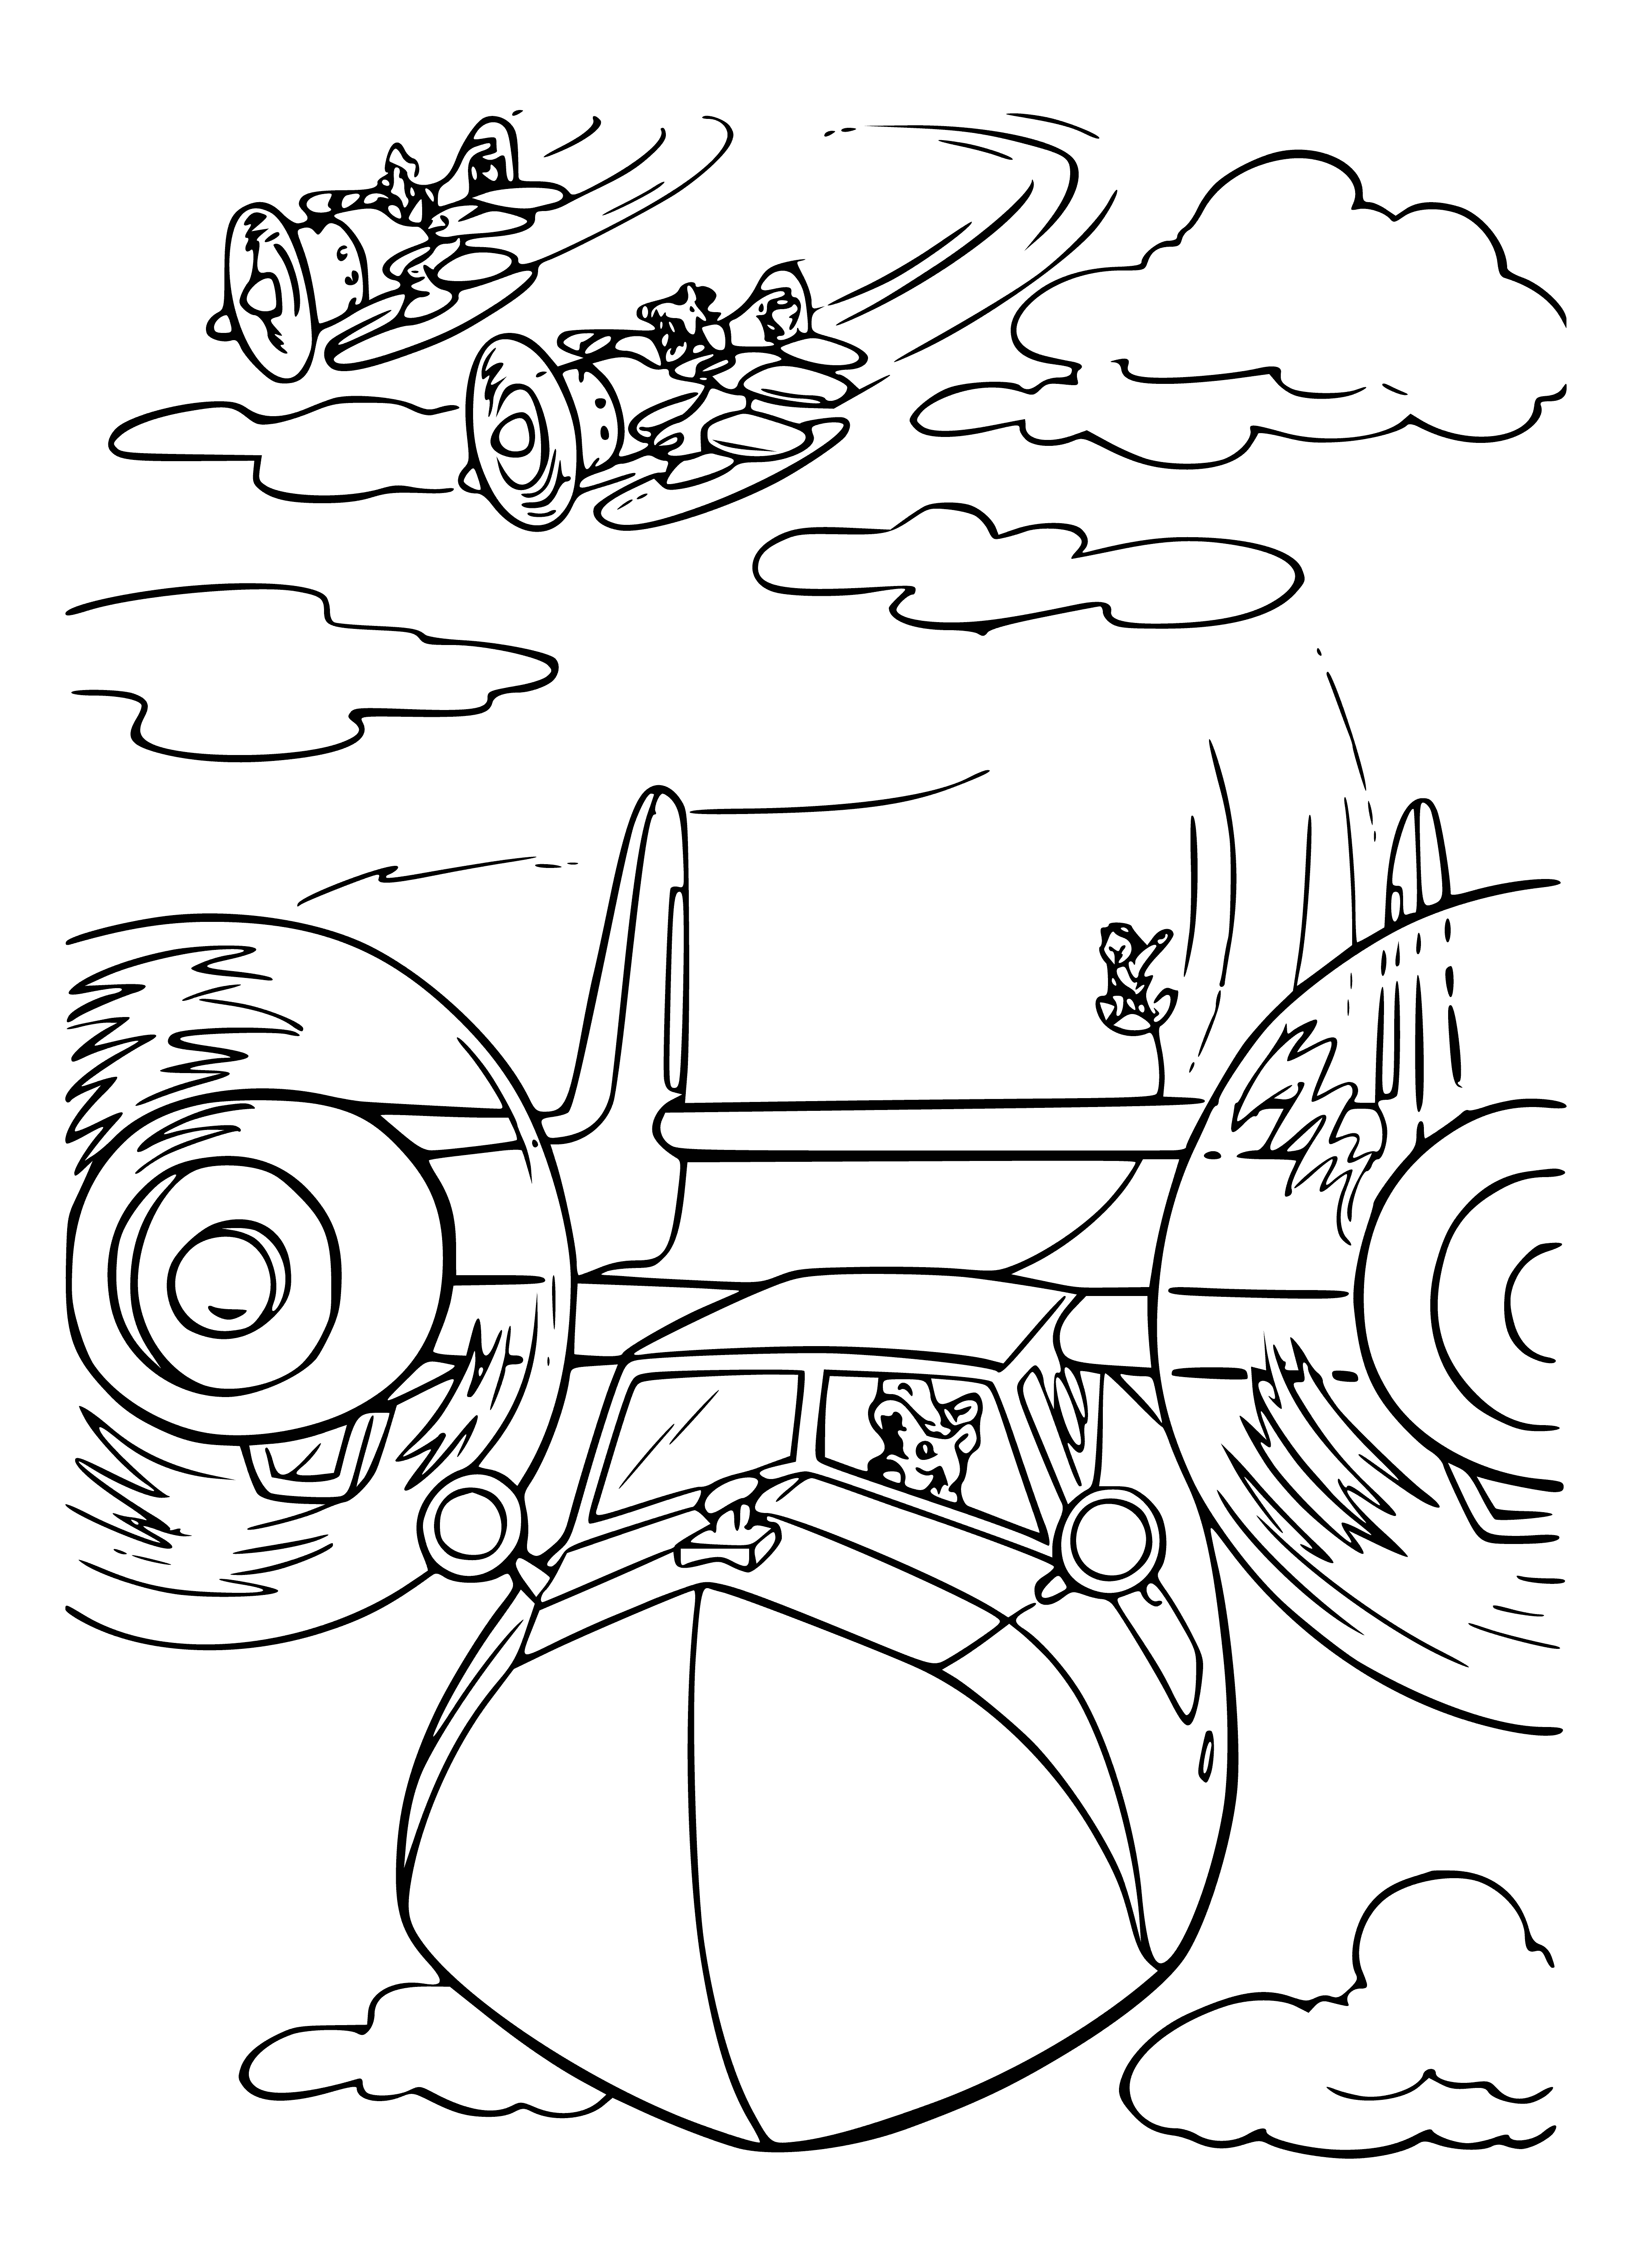 coloring page: Pirates race for treasure chest in rowboat; Speedboat gaining as it drifts downstream with pirate in back holding rope.